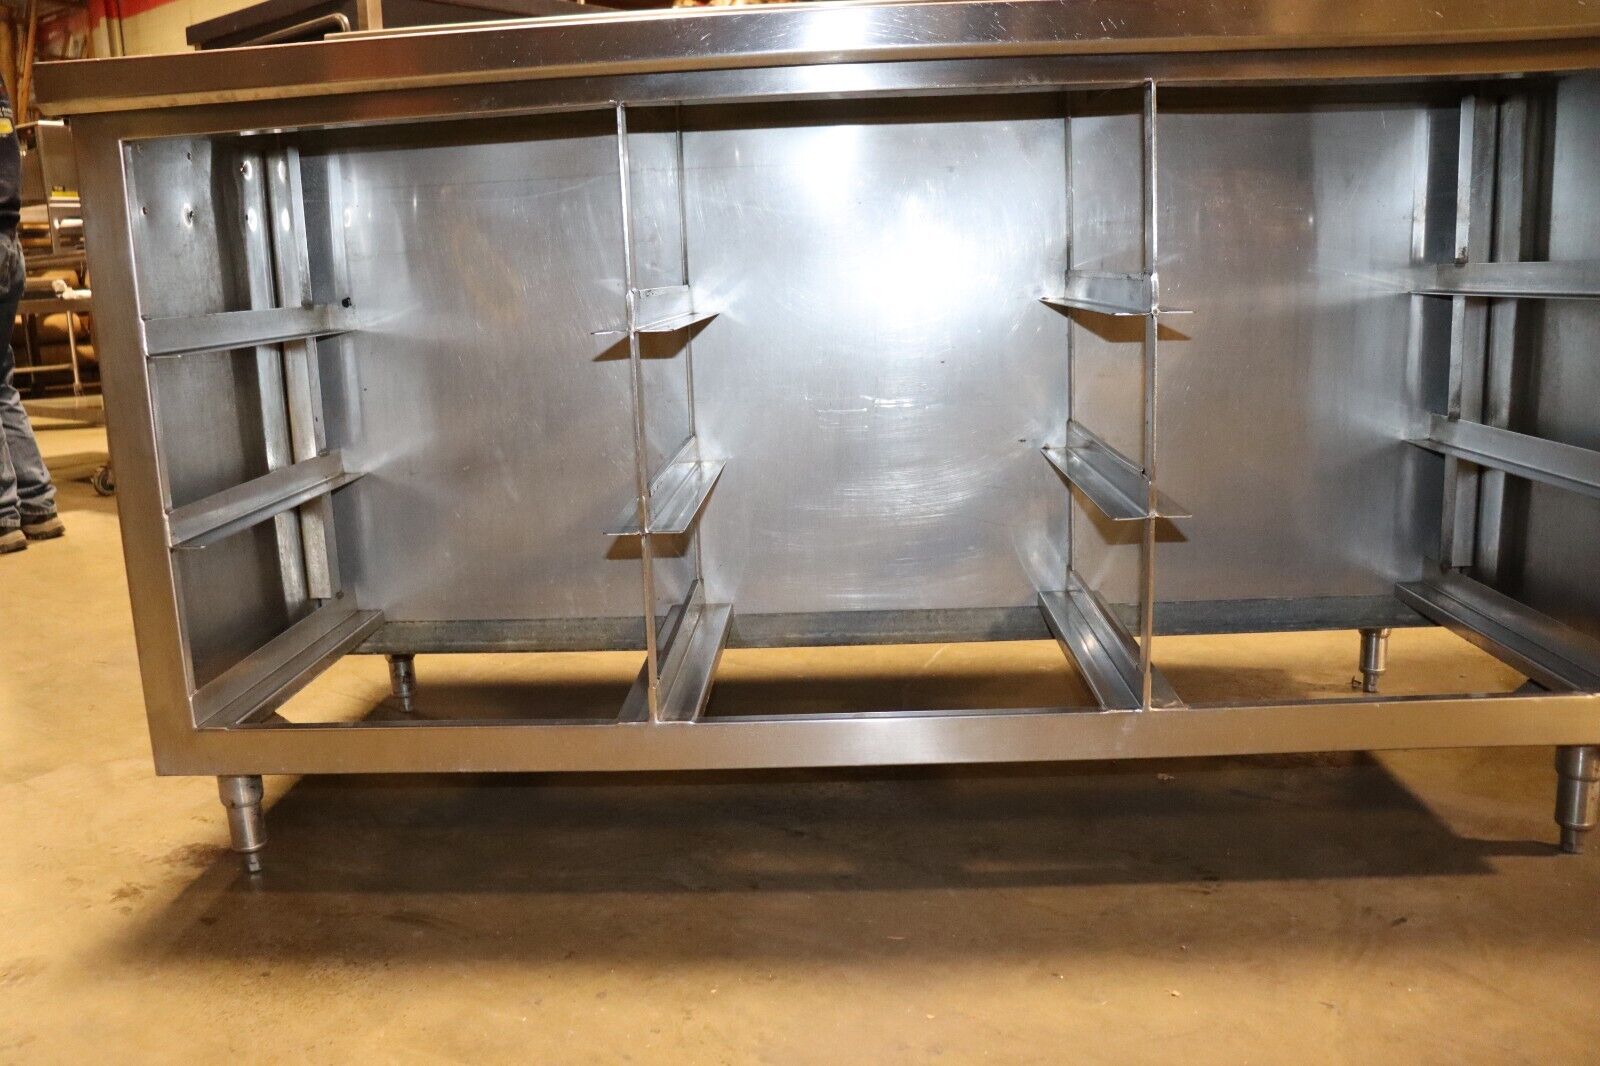 STAINLESS STEEL Table with PAN STORAGE 66 Inch X32 Inch